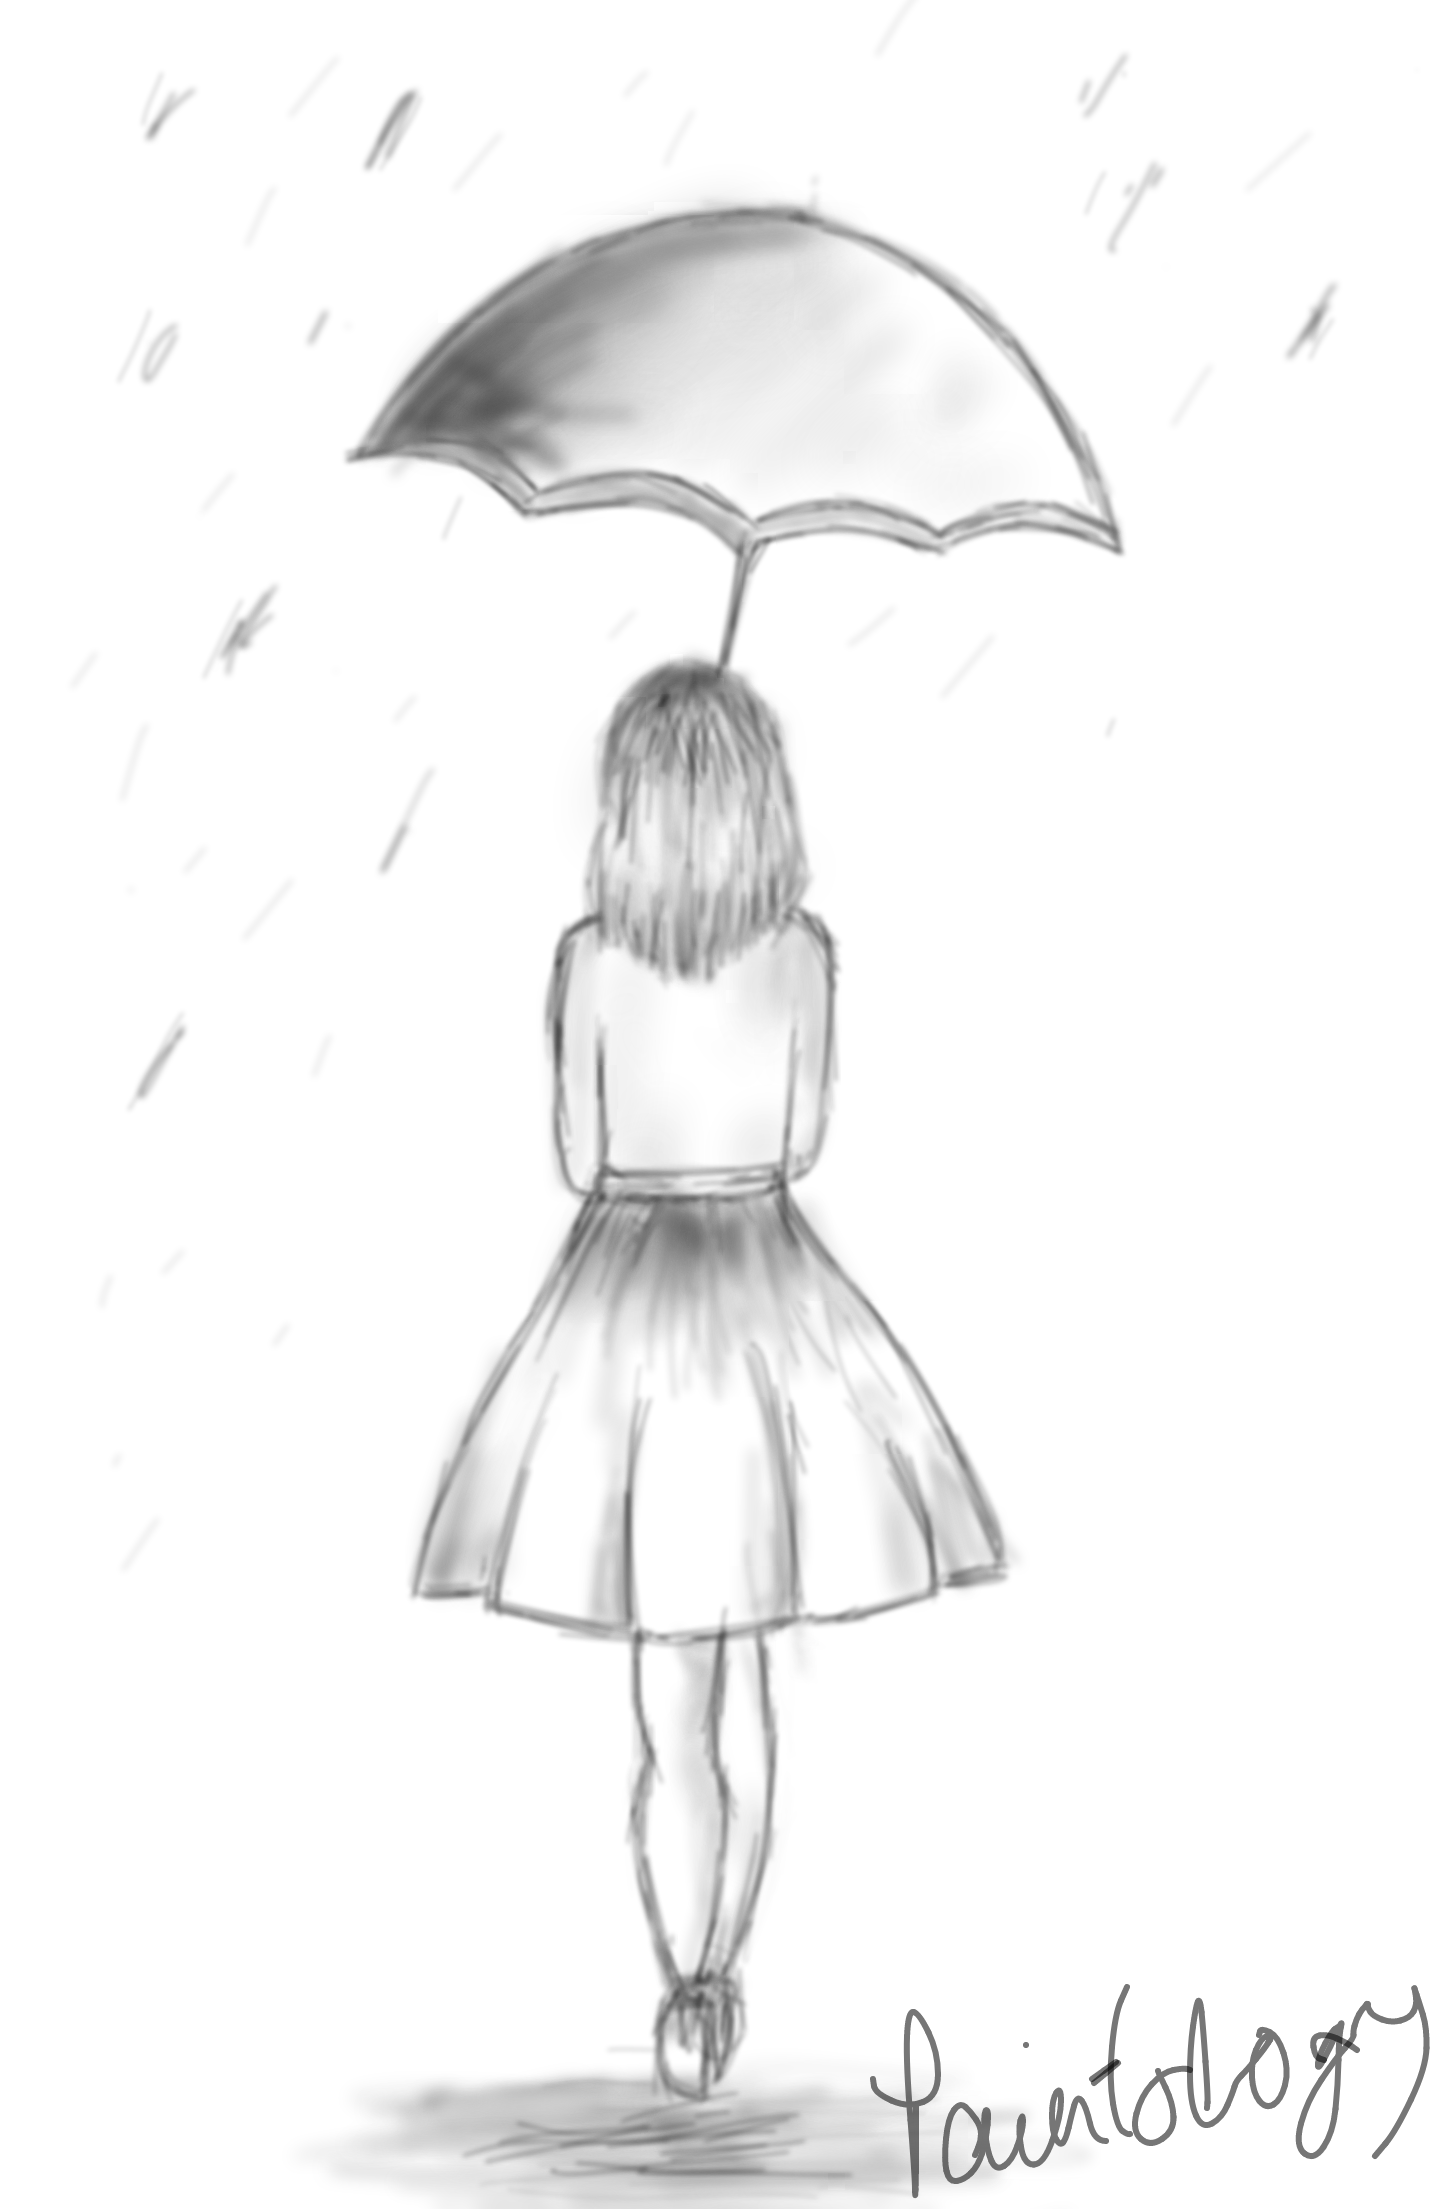 Childrens book illustration of a little girl with an umbrella jumping in a  puddle on a rainy day - illustrated by Sarah LuAnn